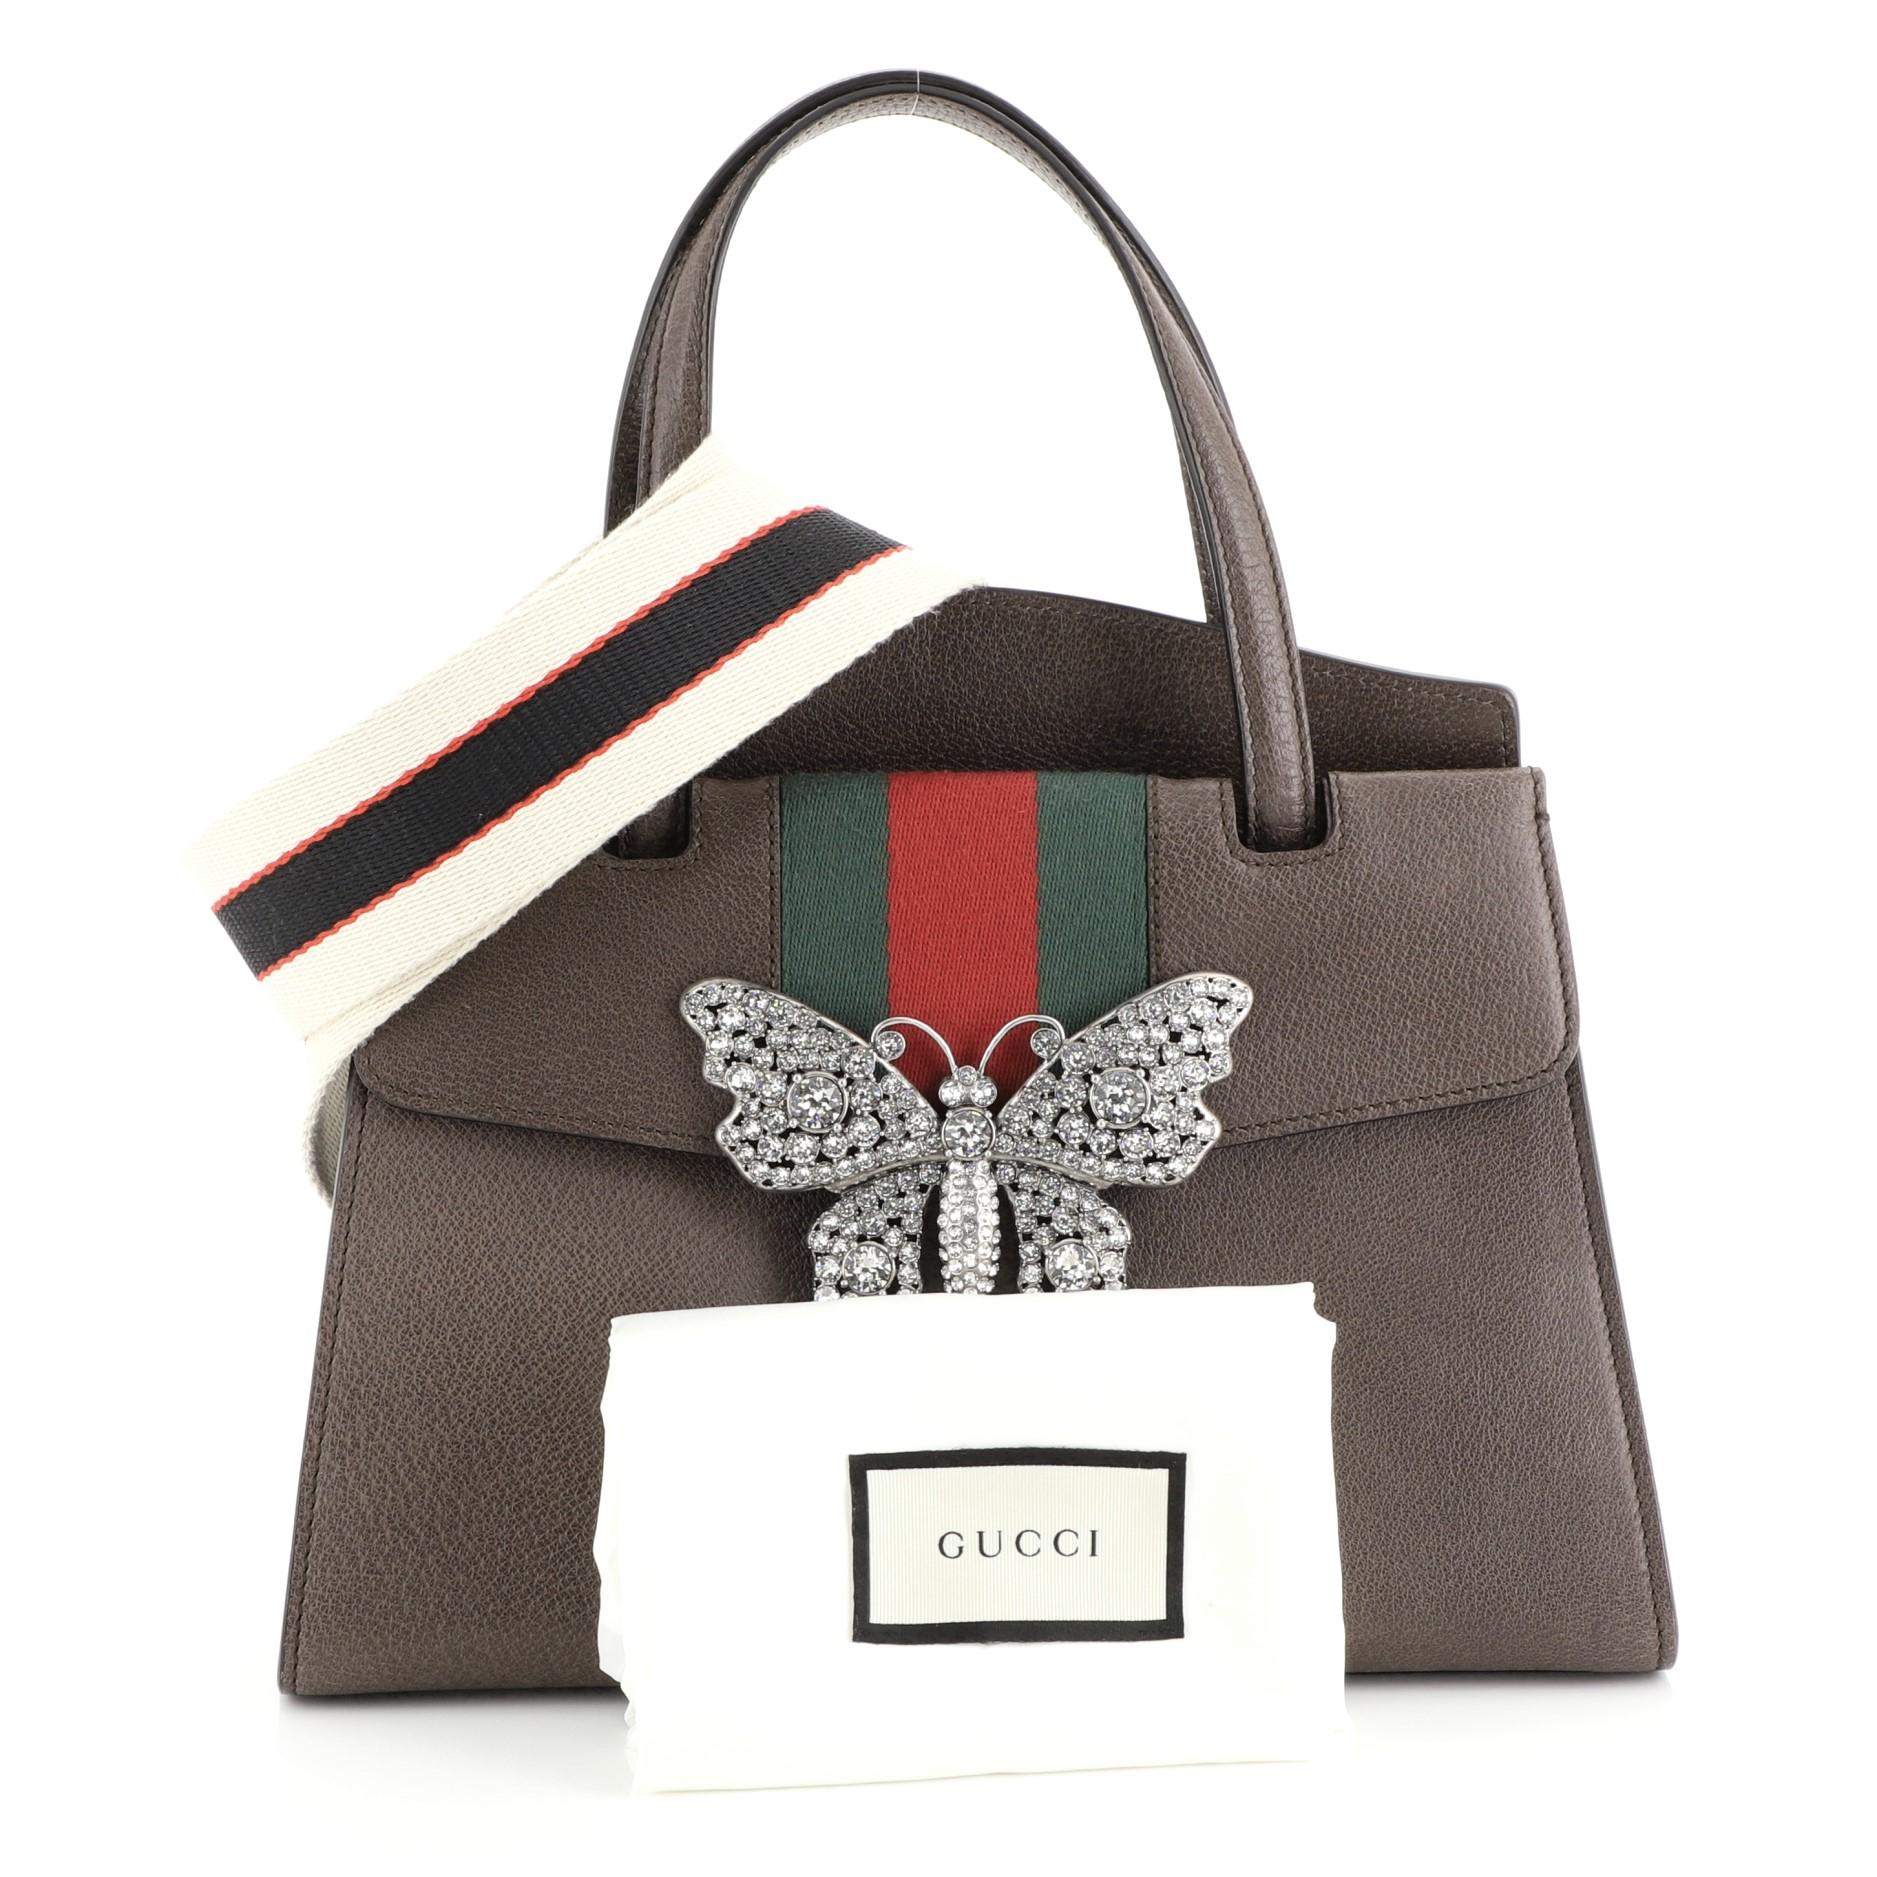 This Gucci Totem Top Handle Bag Leather Medium, crafted from brown leather, features dual leather top handles, green and red web stripe with crystal butterfly ornament, and aged gold-tone hardware. Its press-lock closure opens to a neutral